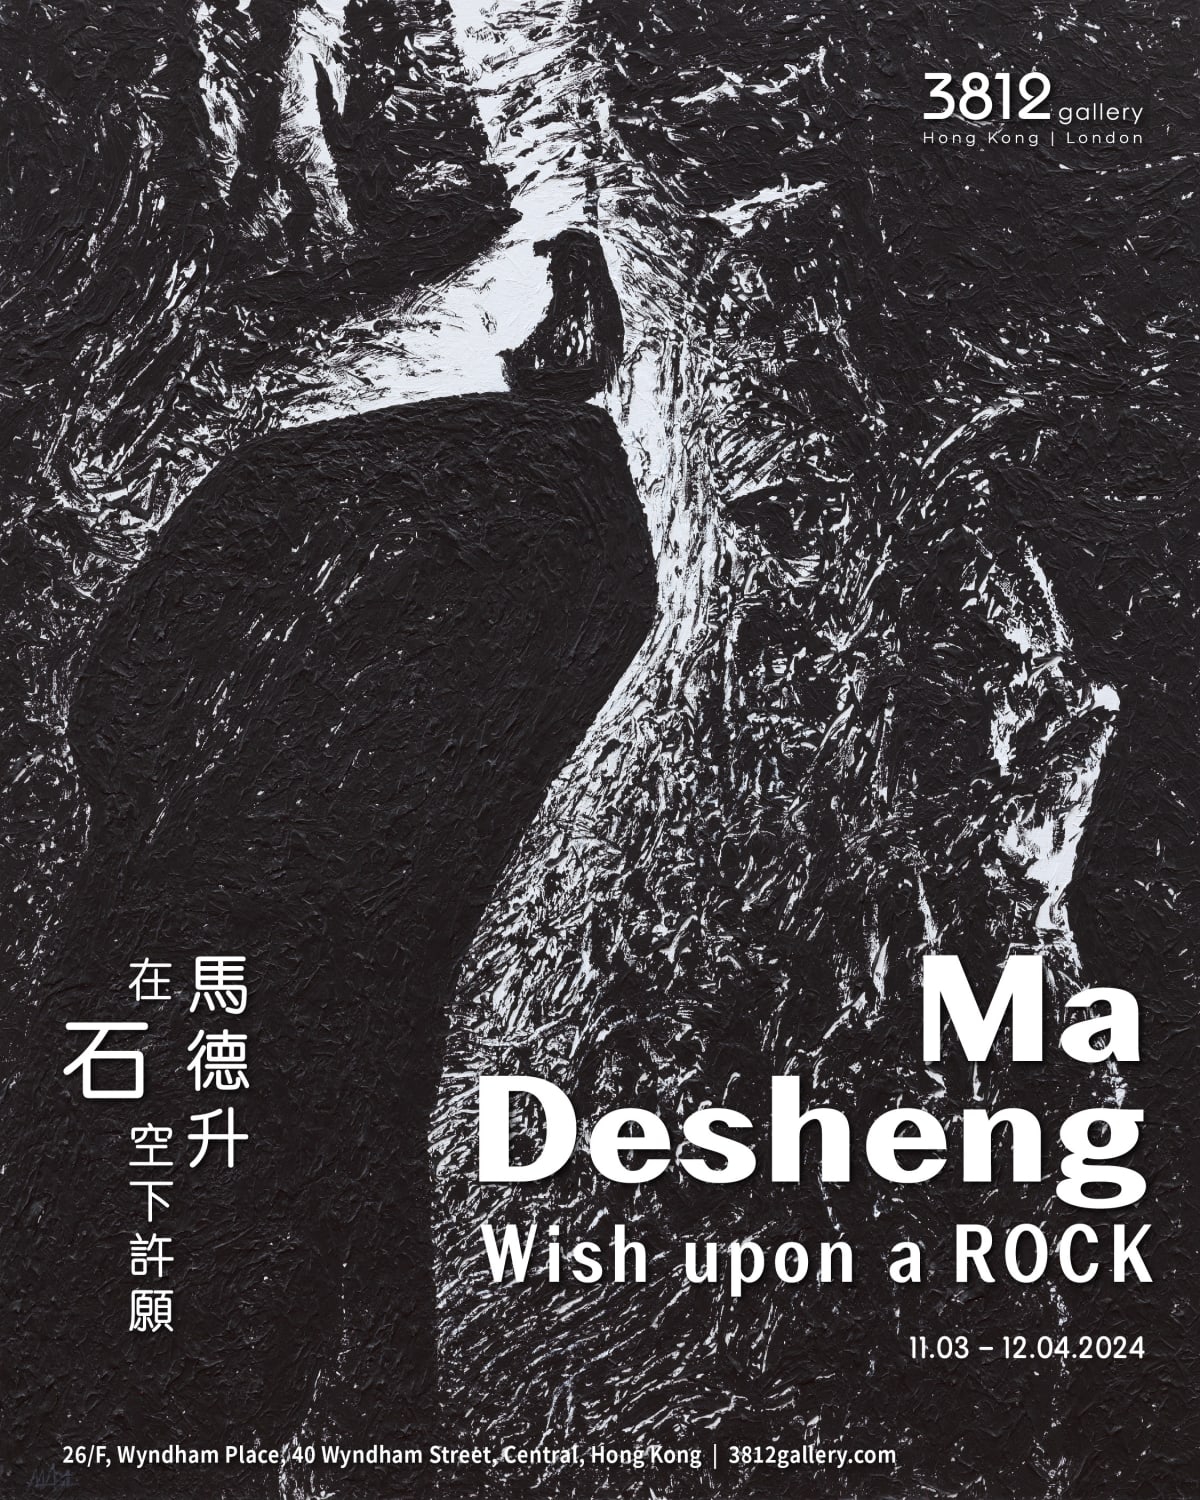 Wish upon a Rock